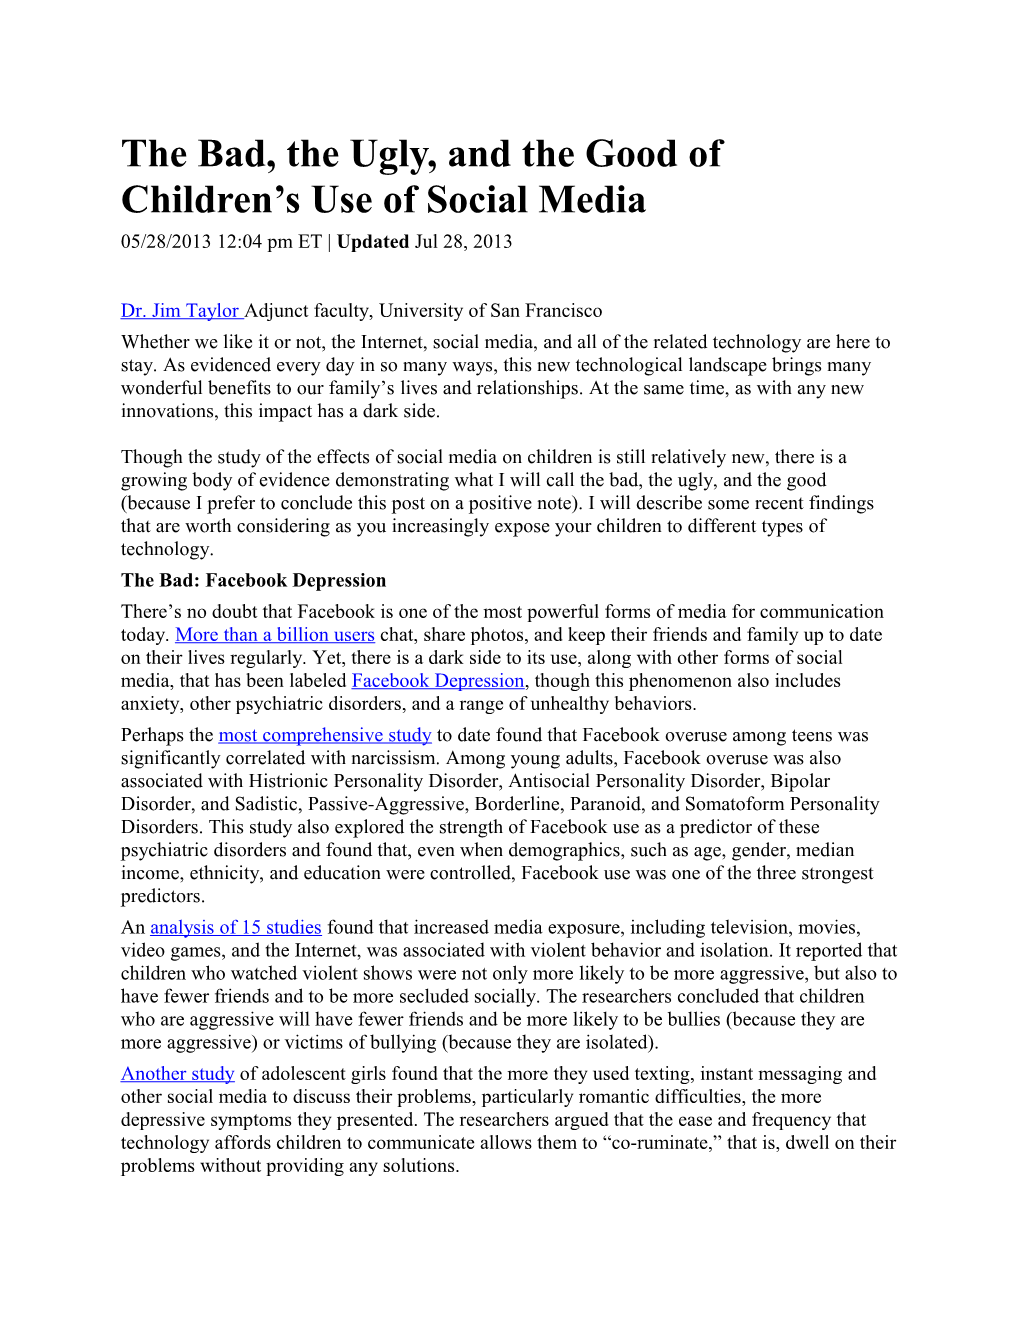 The Bad, the Ugly, and the Good of Children S Use of Social Media